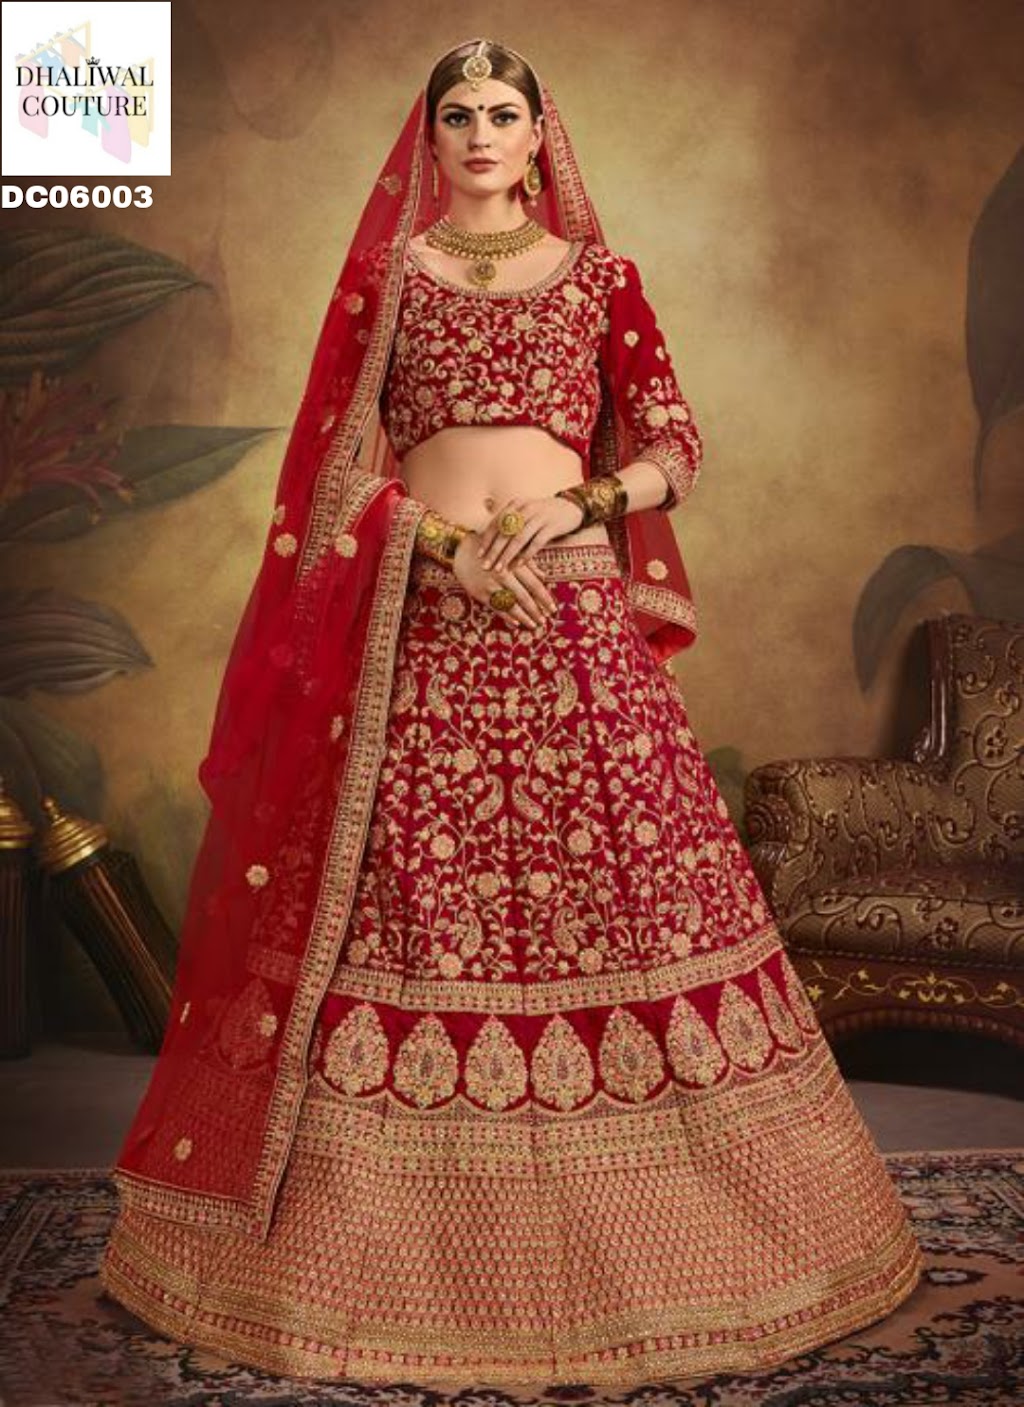 Dhaliwal Couture | clothing store | 13060 59A Ave, Surrey, BC V3X 0G5, Canada | 7789574045 OR +1 778-957-4045